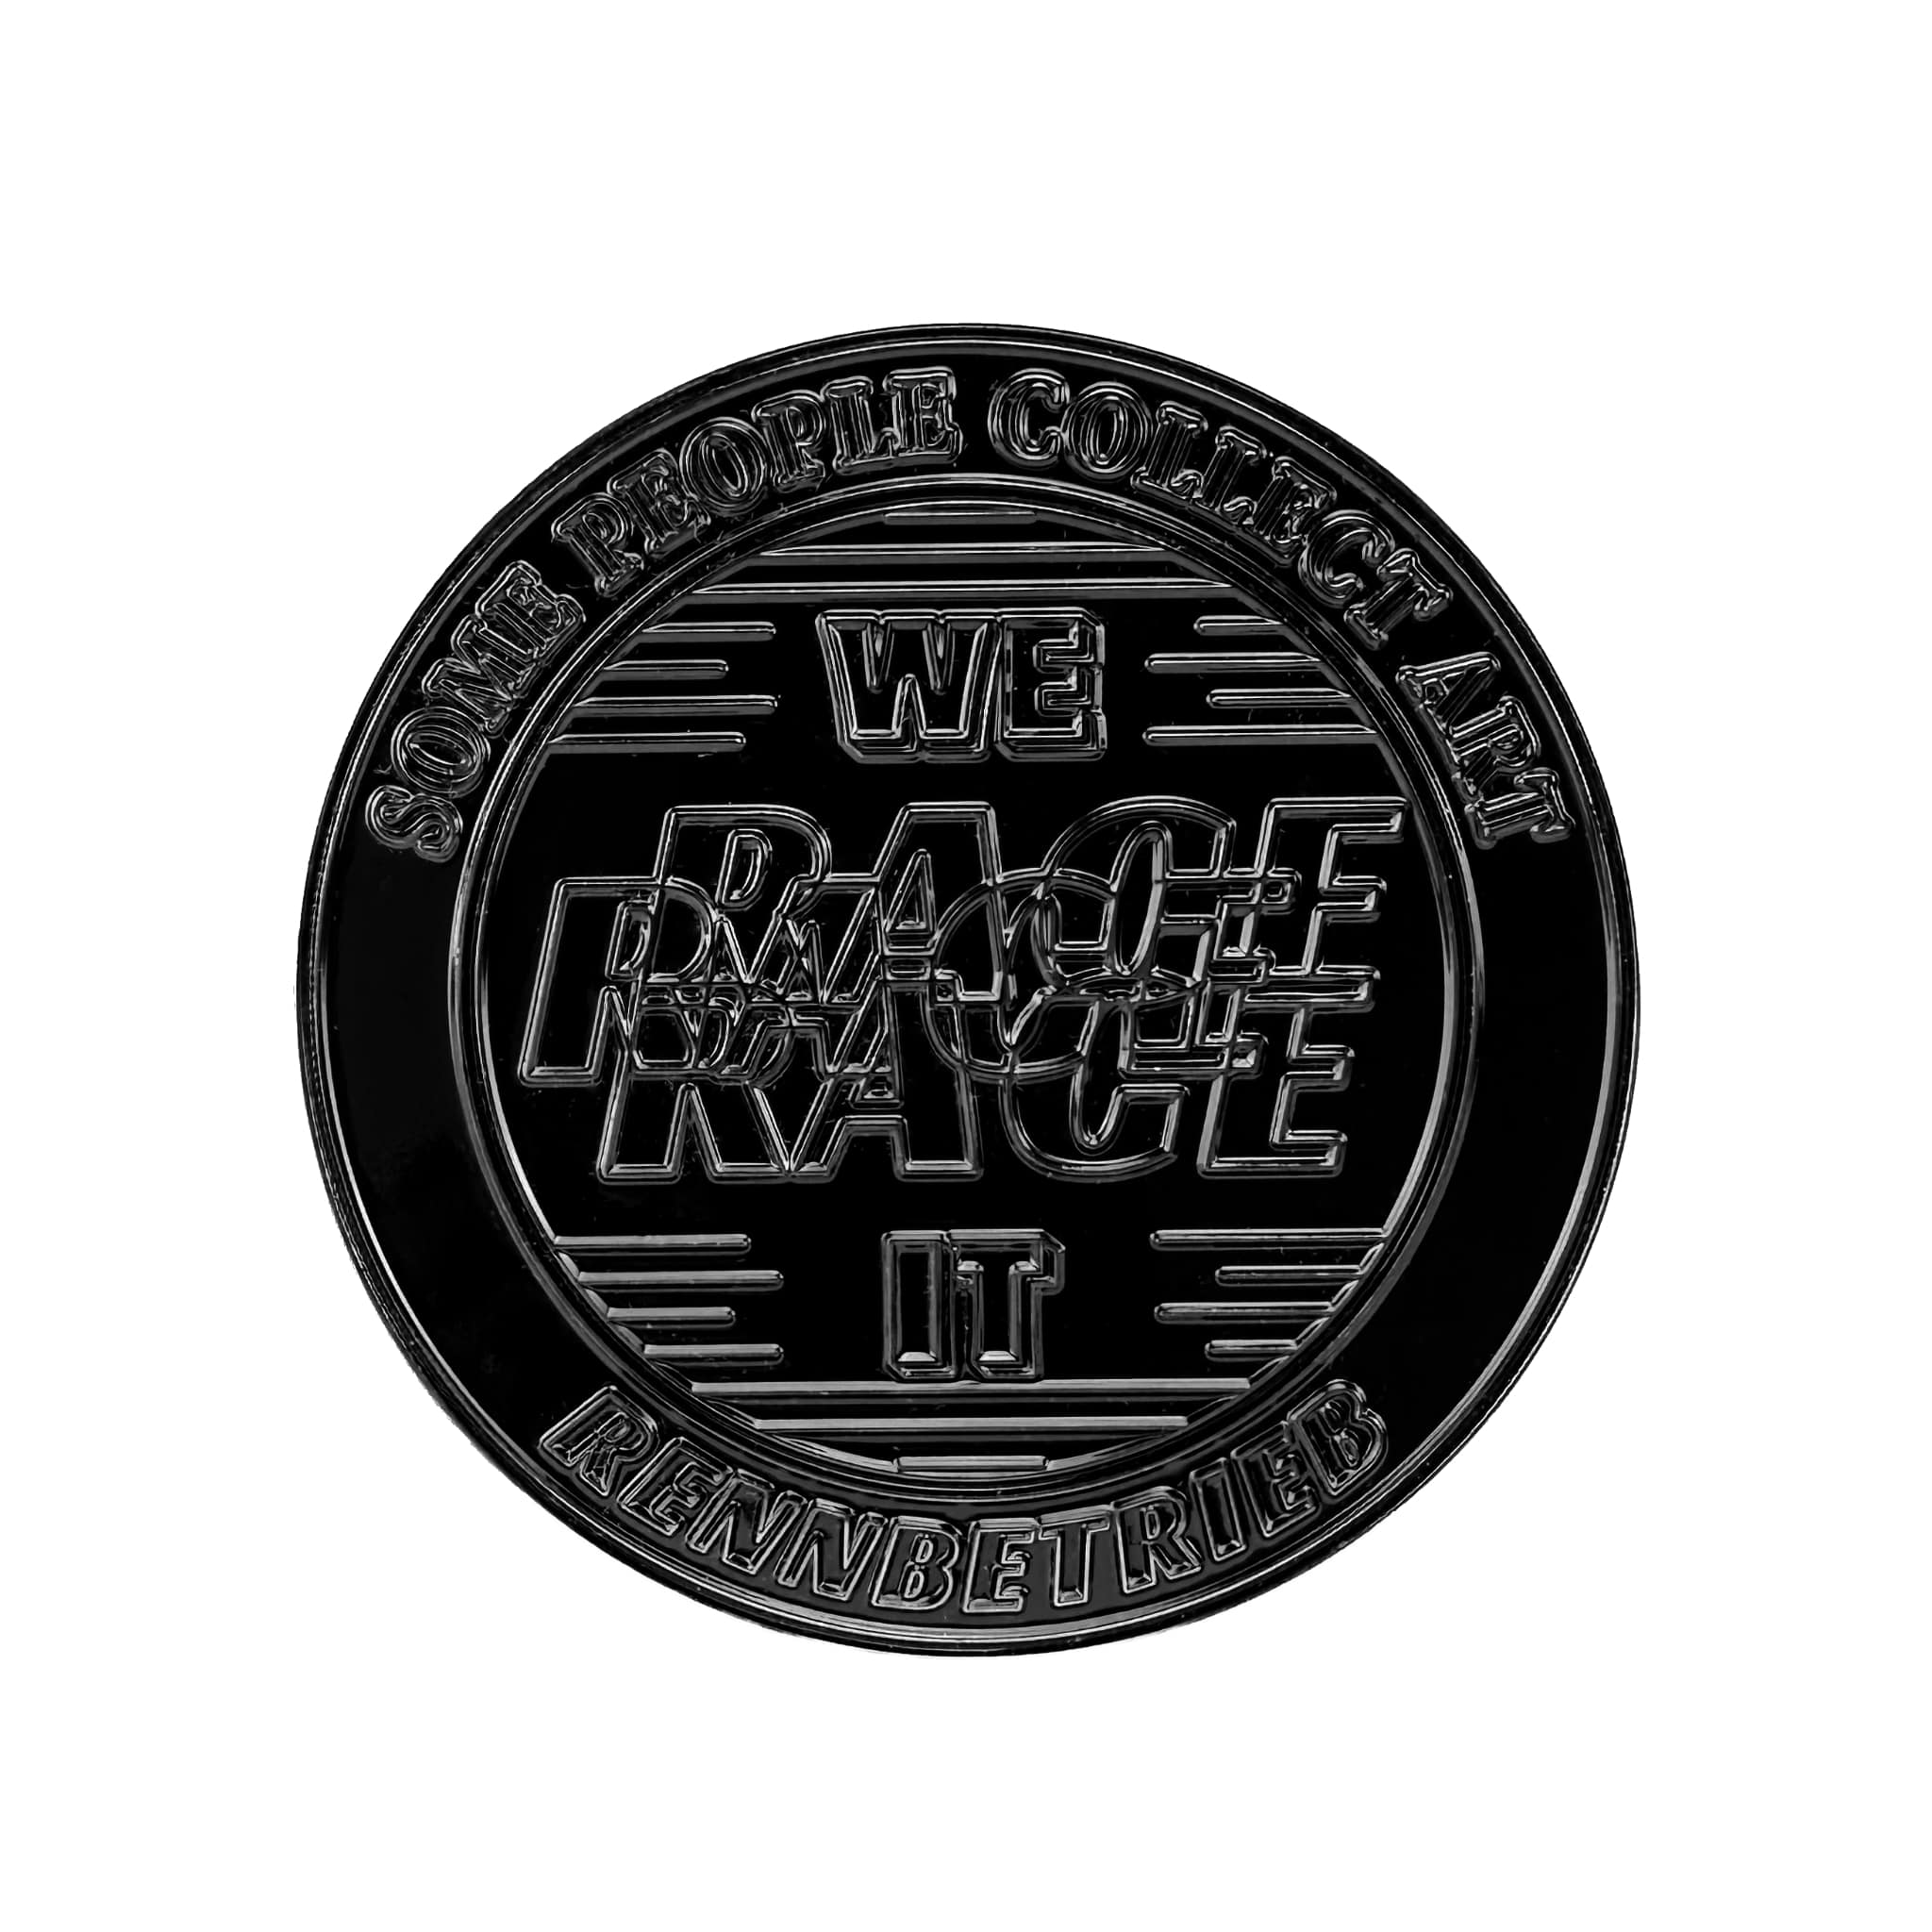 enamel badge some people collect art we race it - black edition